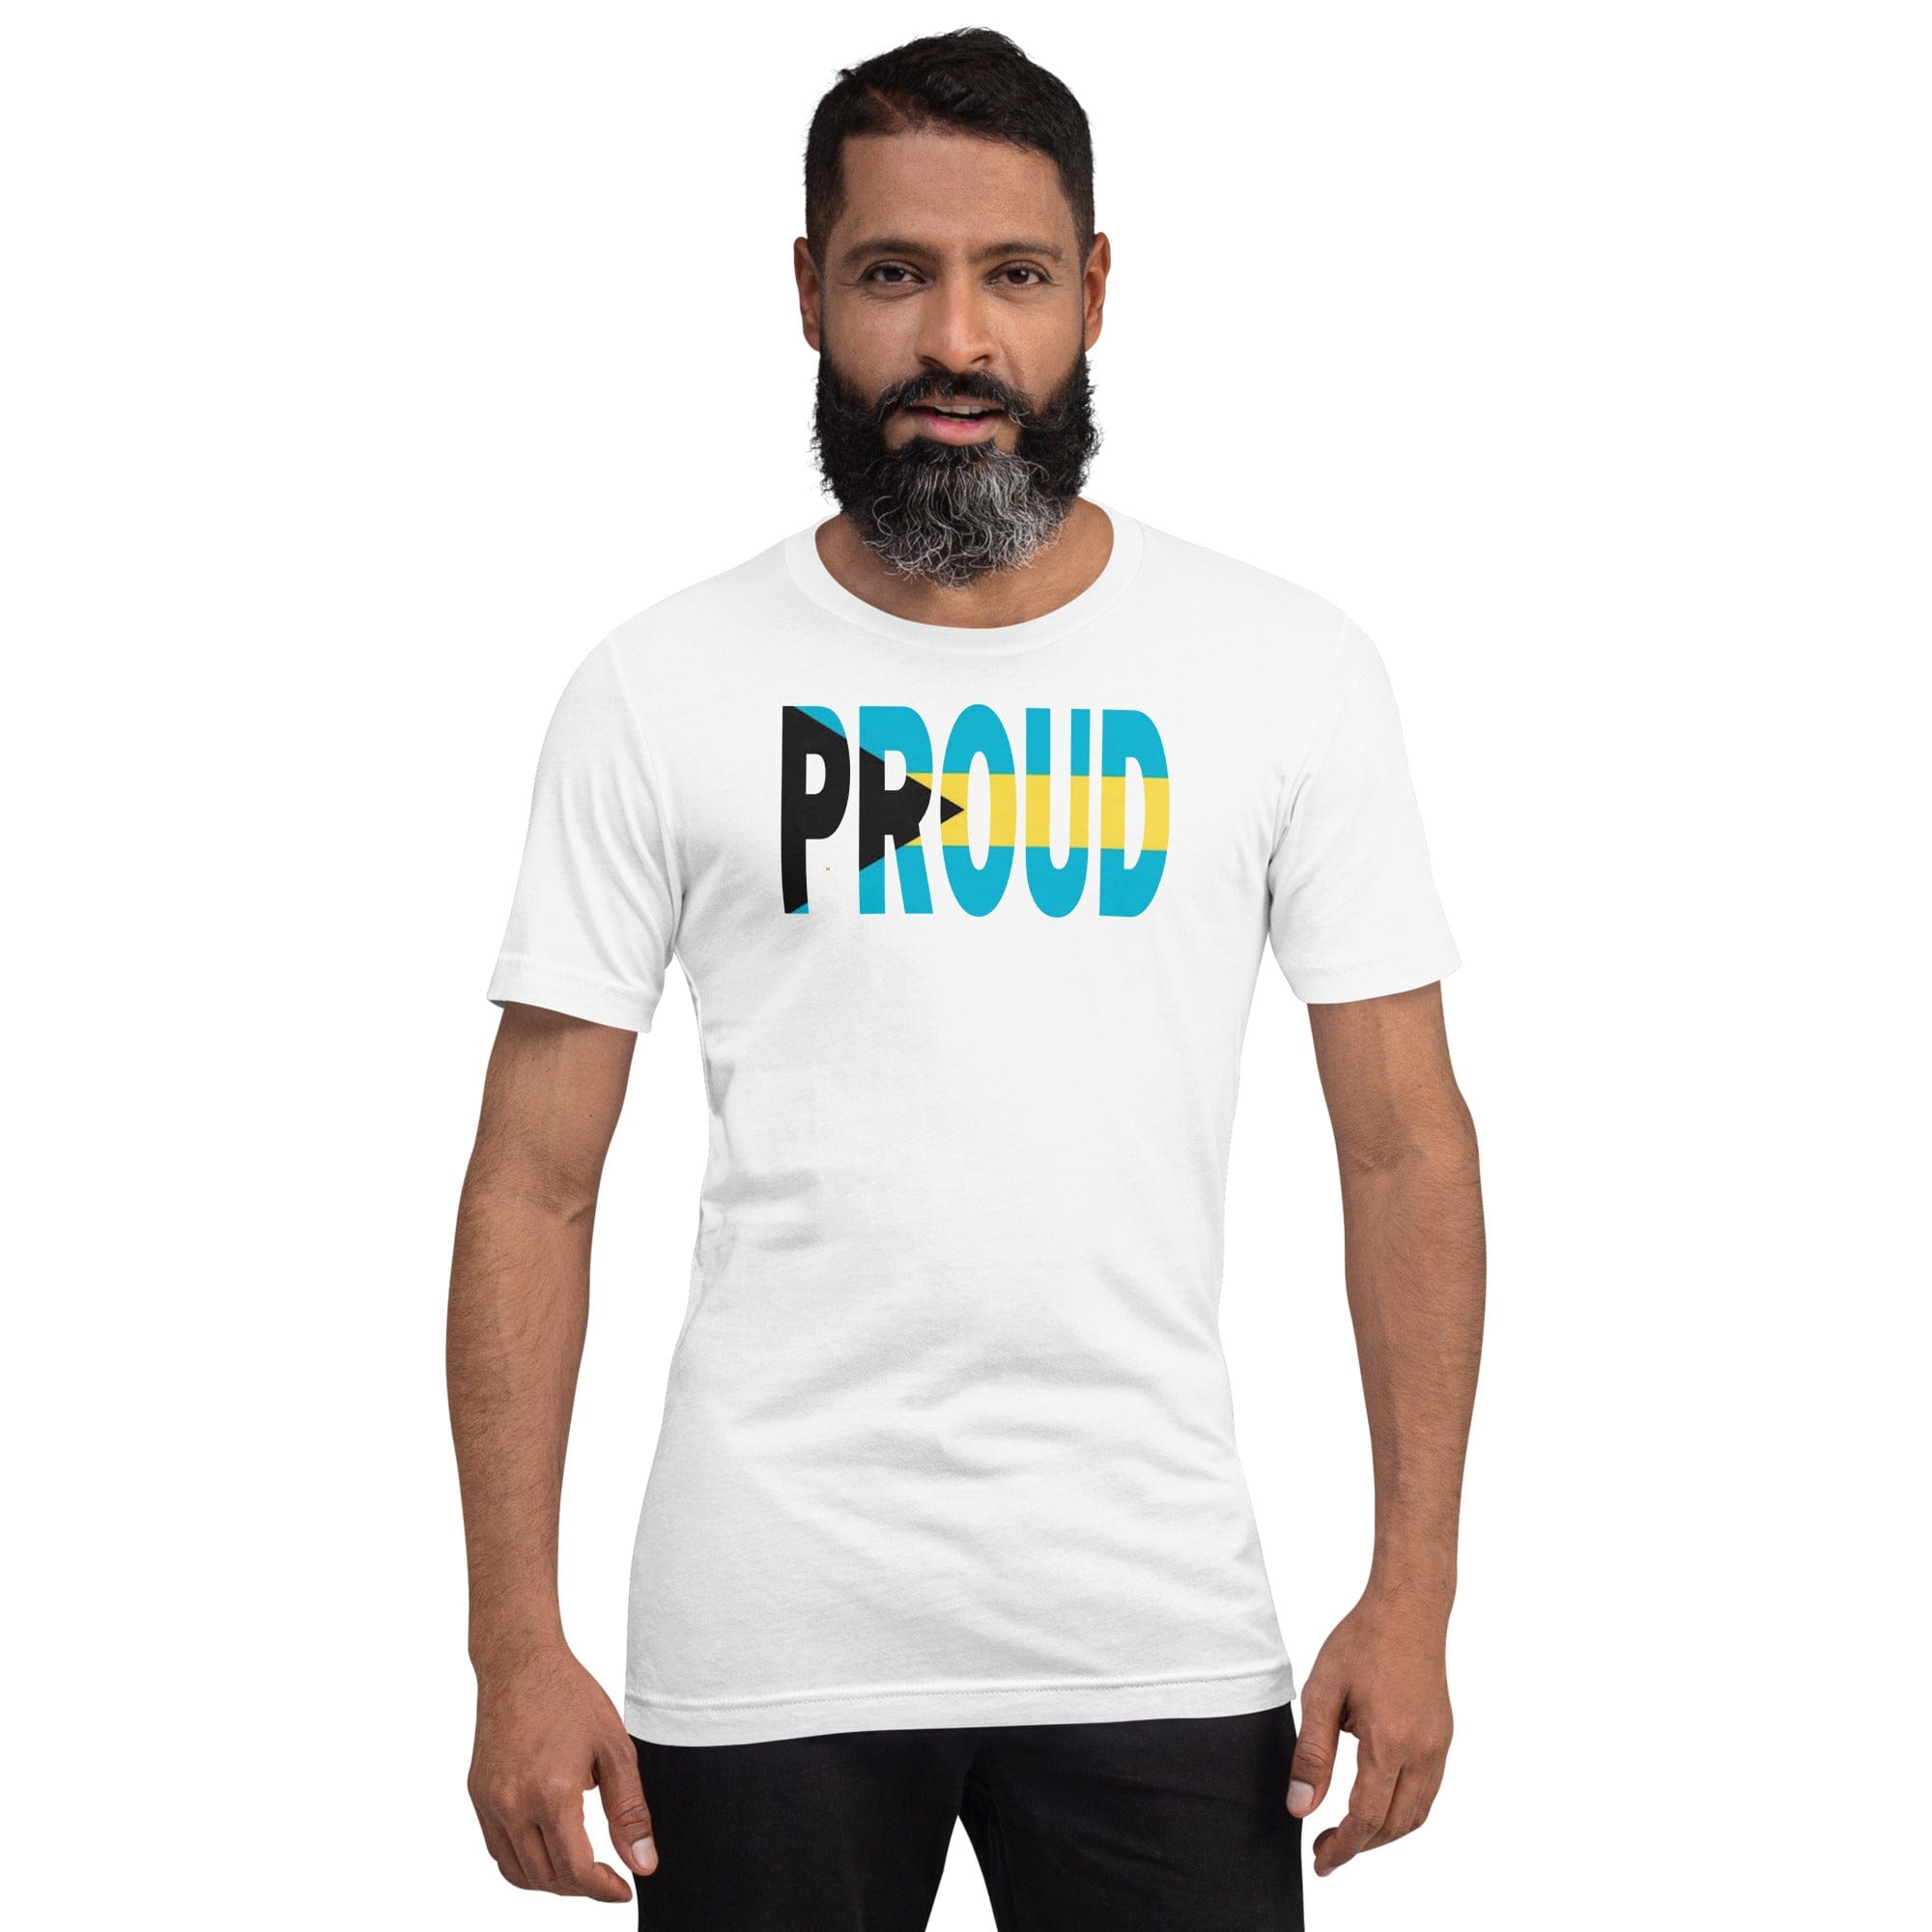 Bahamas Flag designed to spell Proud on a white color t-shirt worn by a black man.